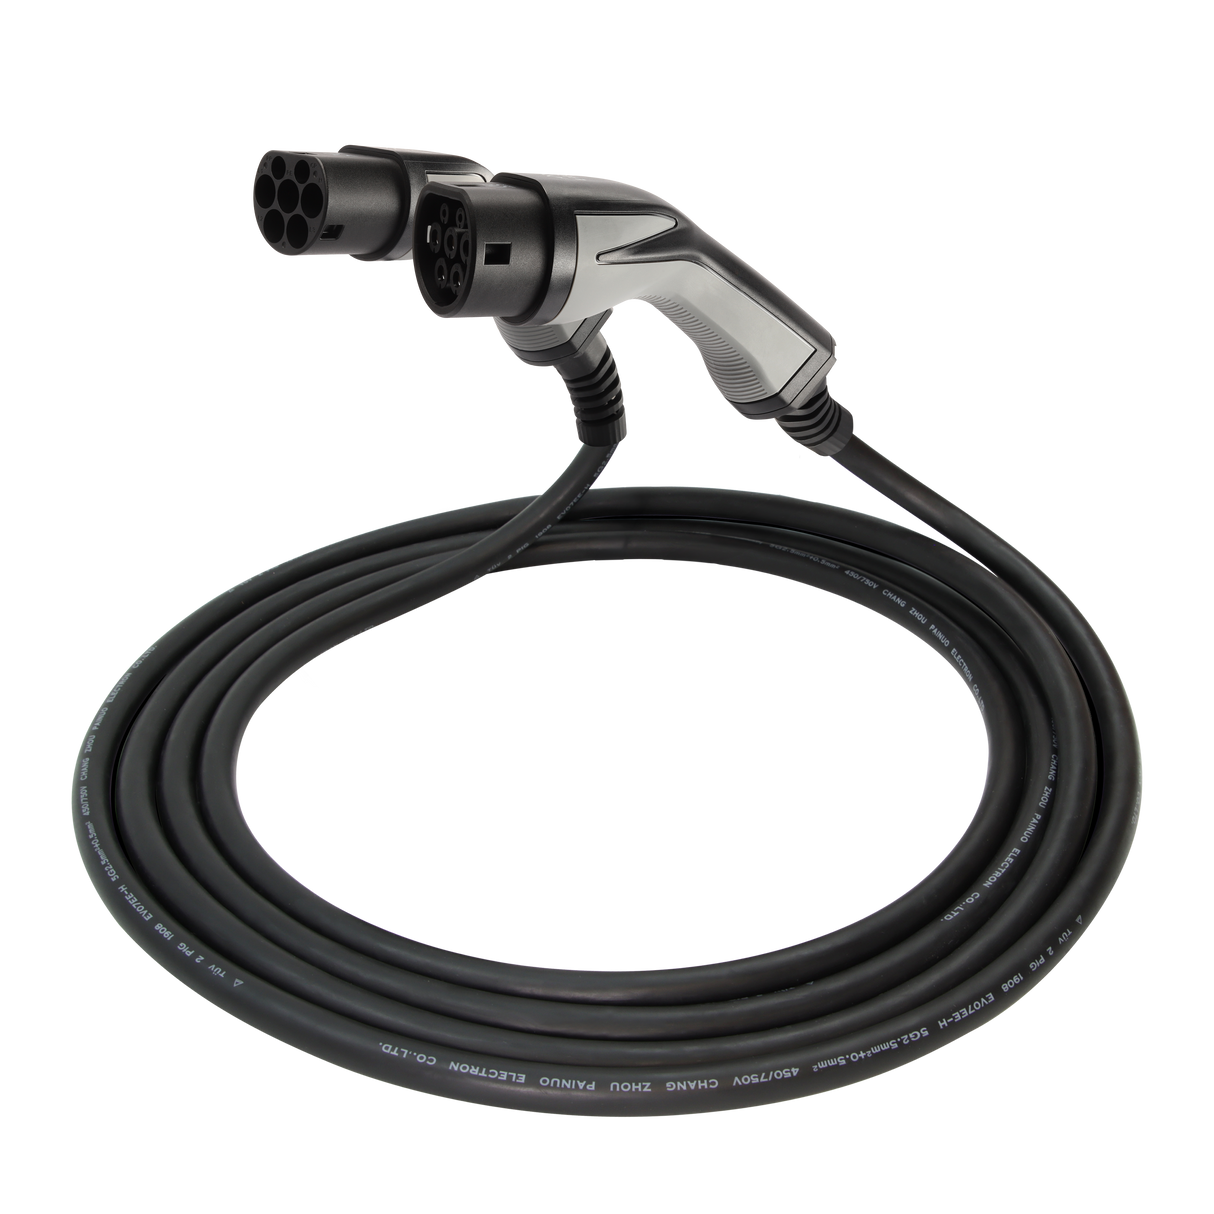 Charging cable Ford Explorer - Erock Pro Type 2 - 16A 1 phase (3.7 kW)